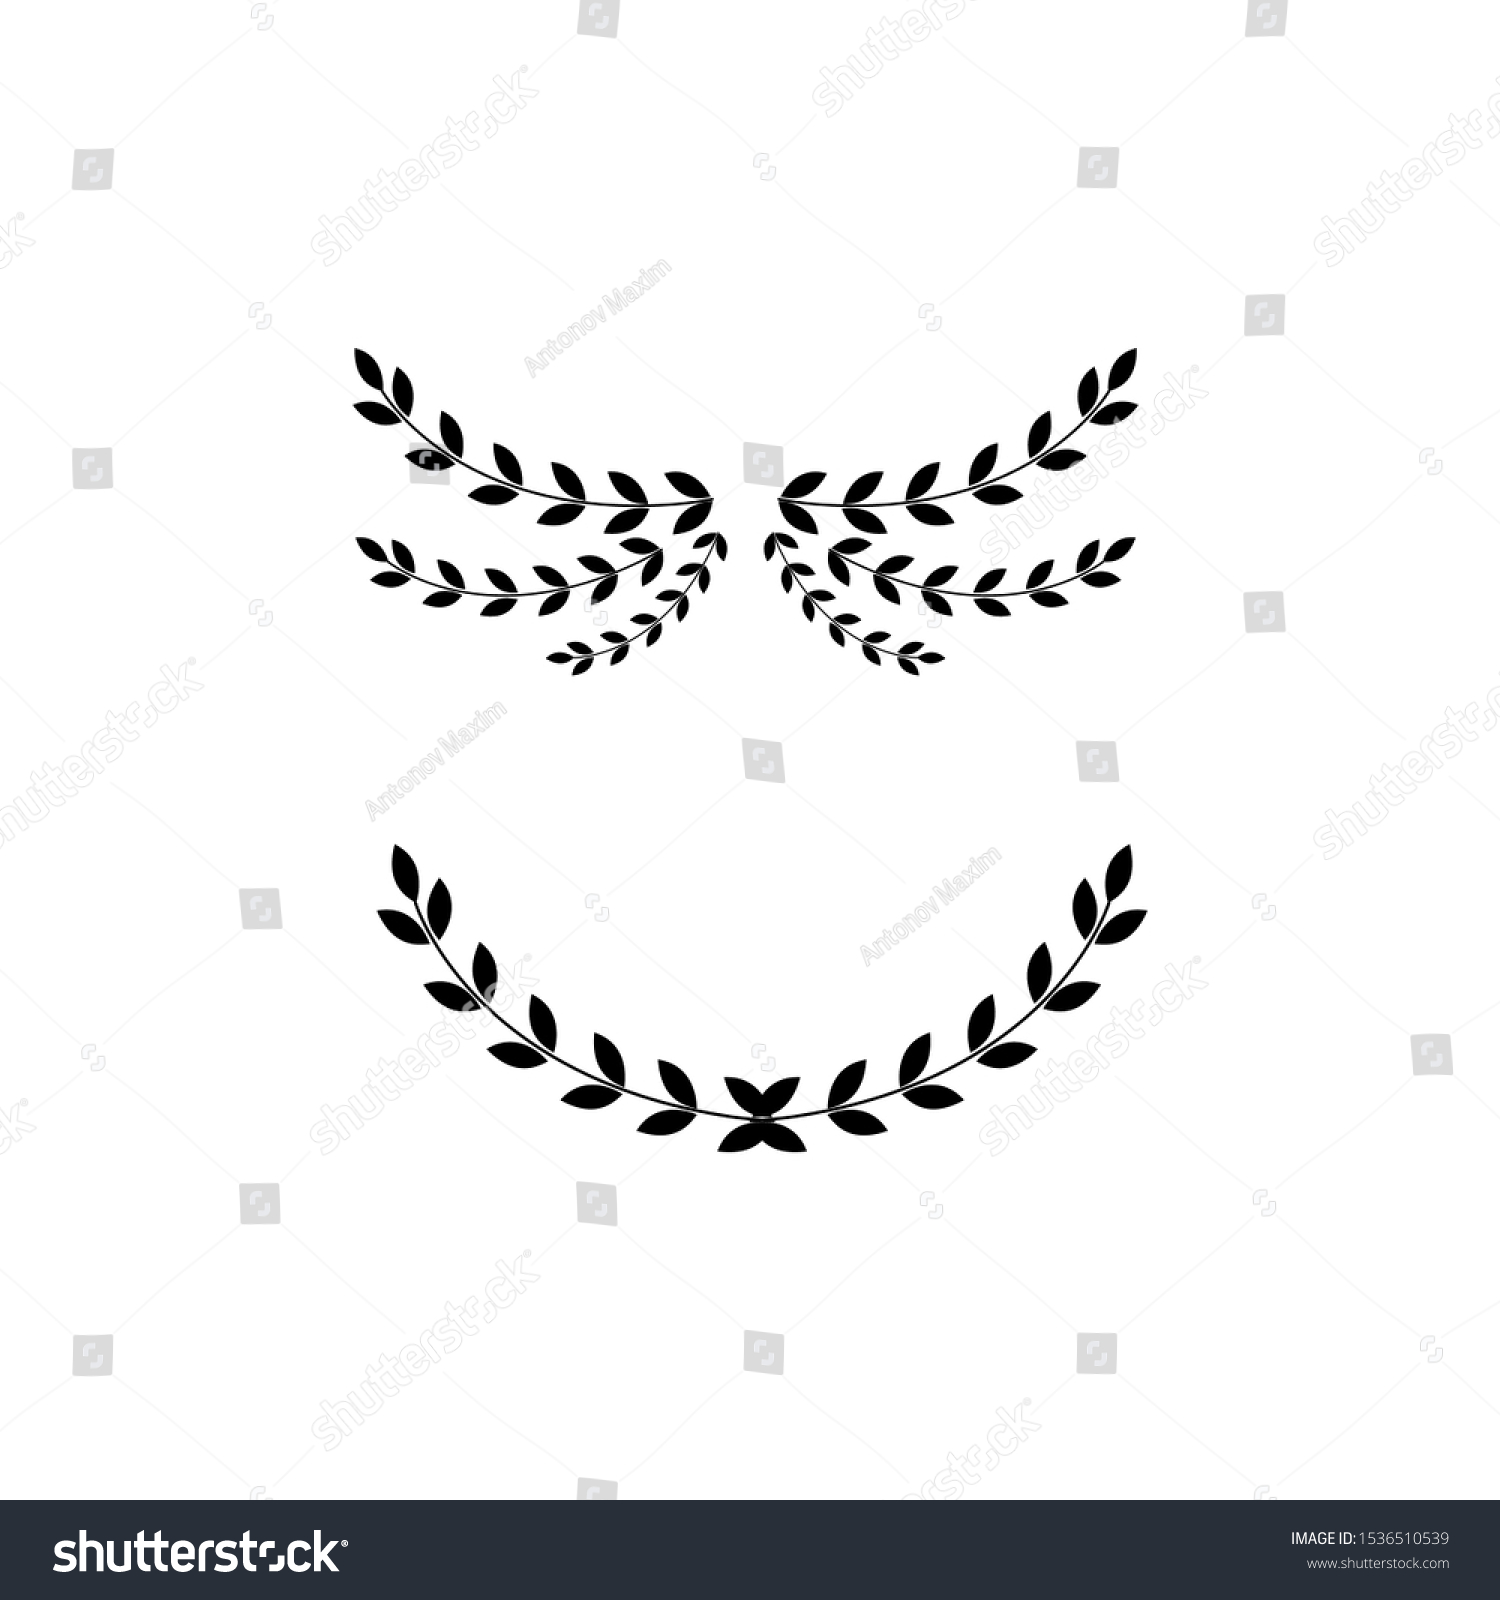 SVG of Black wreath divider set - isolated arched laurel branches with leaves forming a curve. Page embellishment or ornate leaf arch decoration - flat vector illustration. svg